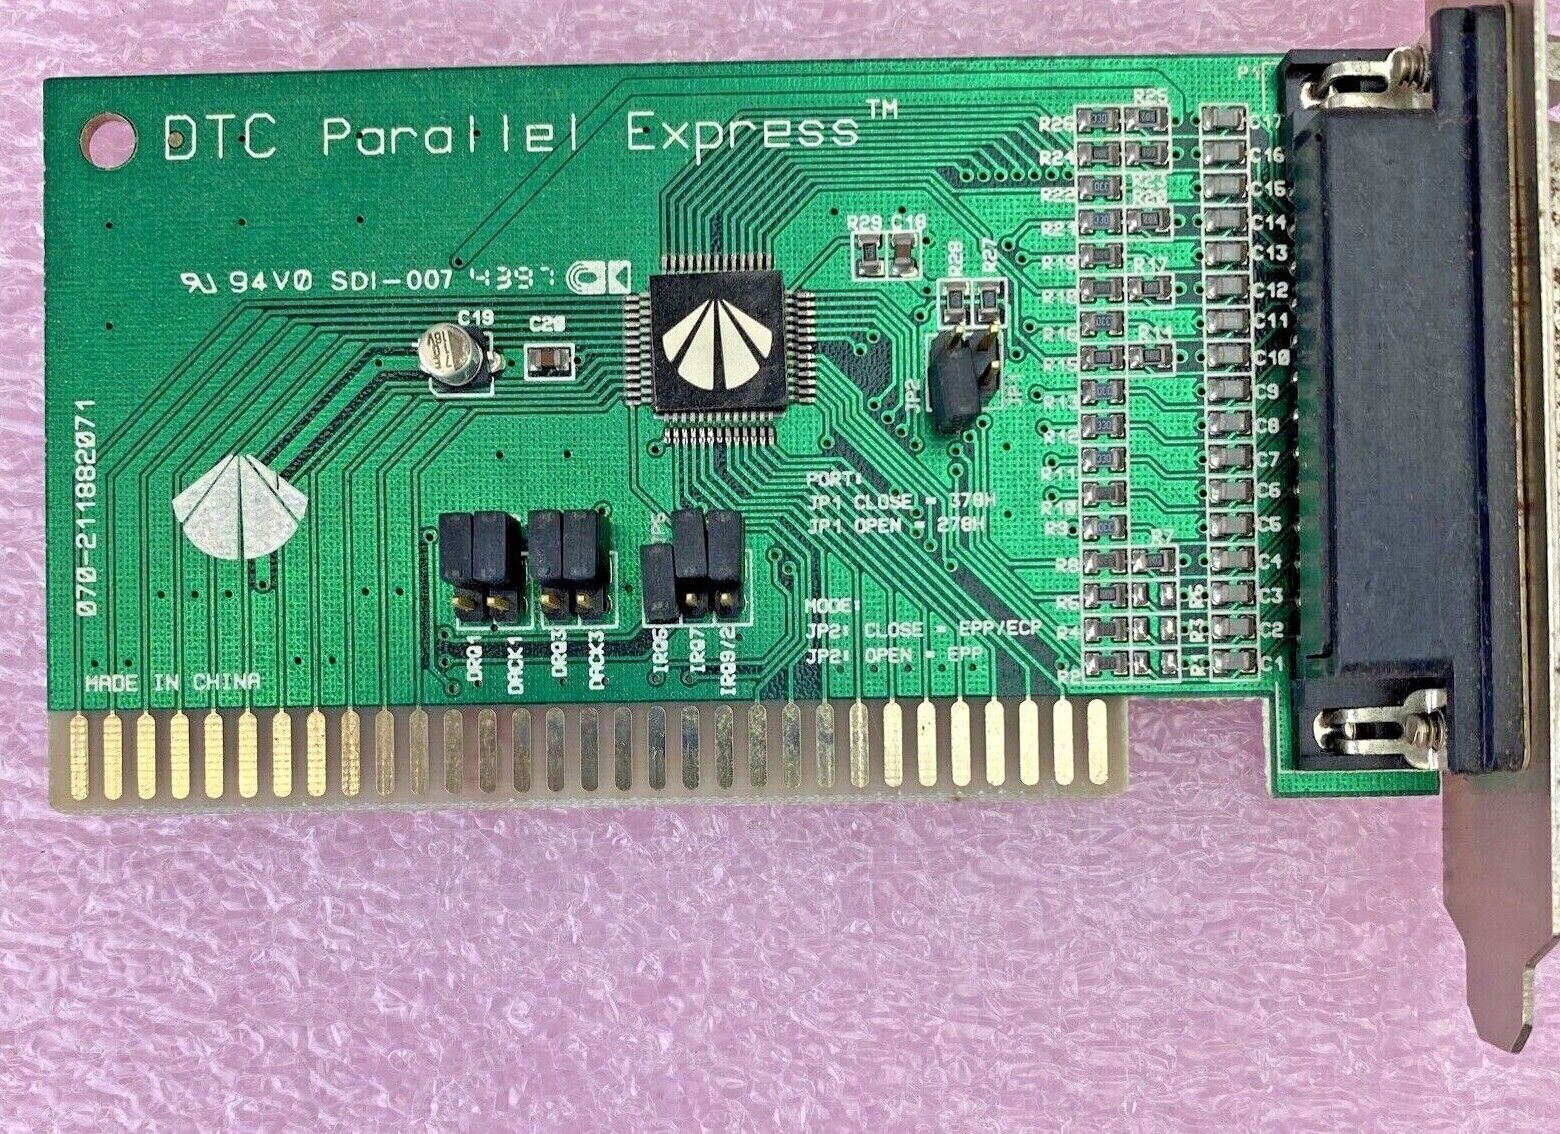 DTC 400598-01 Parallel Express DTC1188 ISA Card